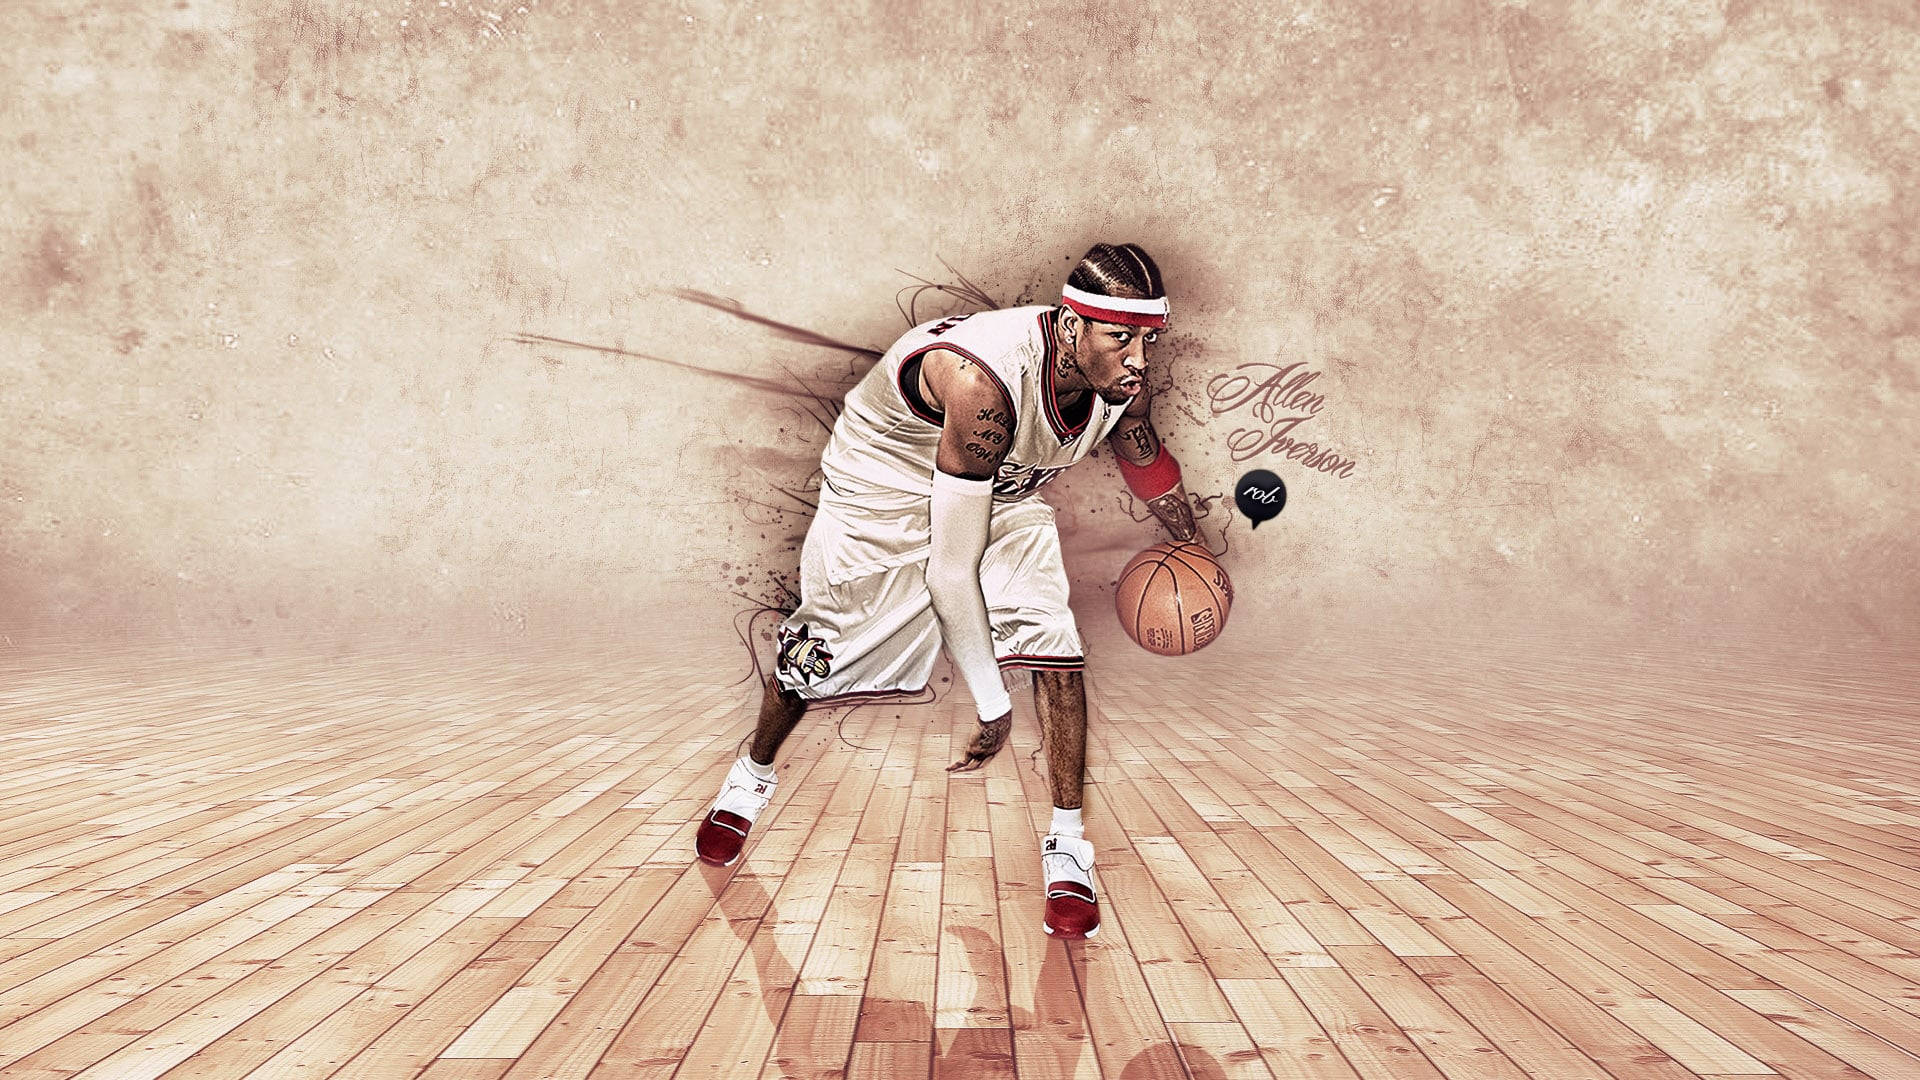 Caption: Allen Iverson in Action - Master of Dribbling Wallpaper